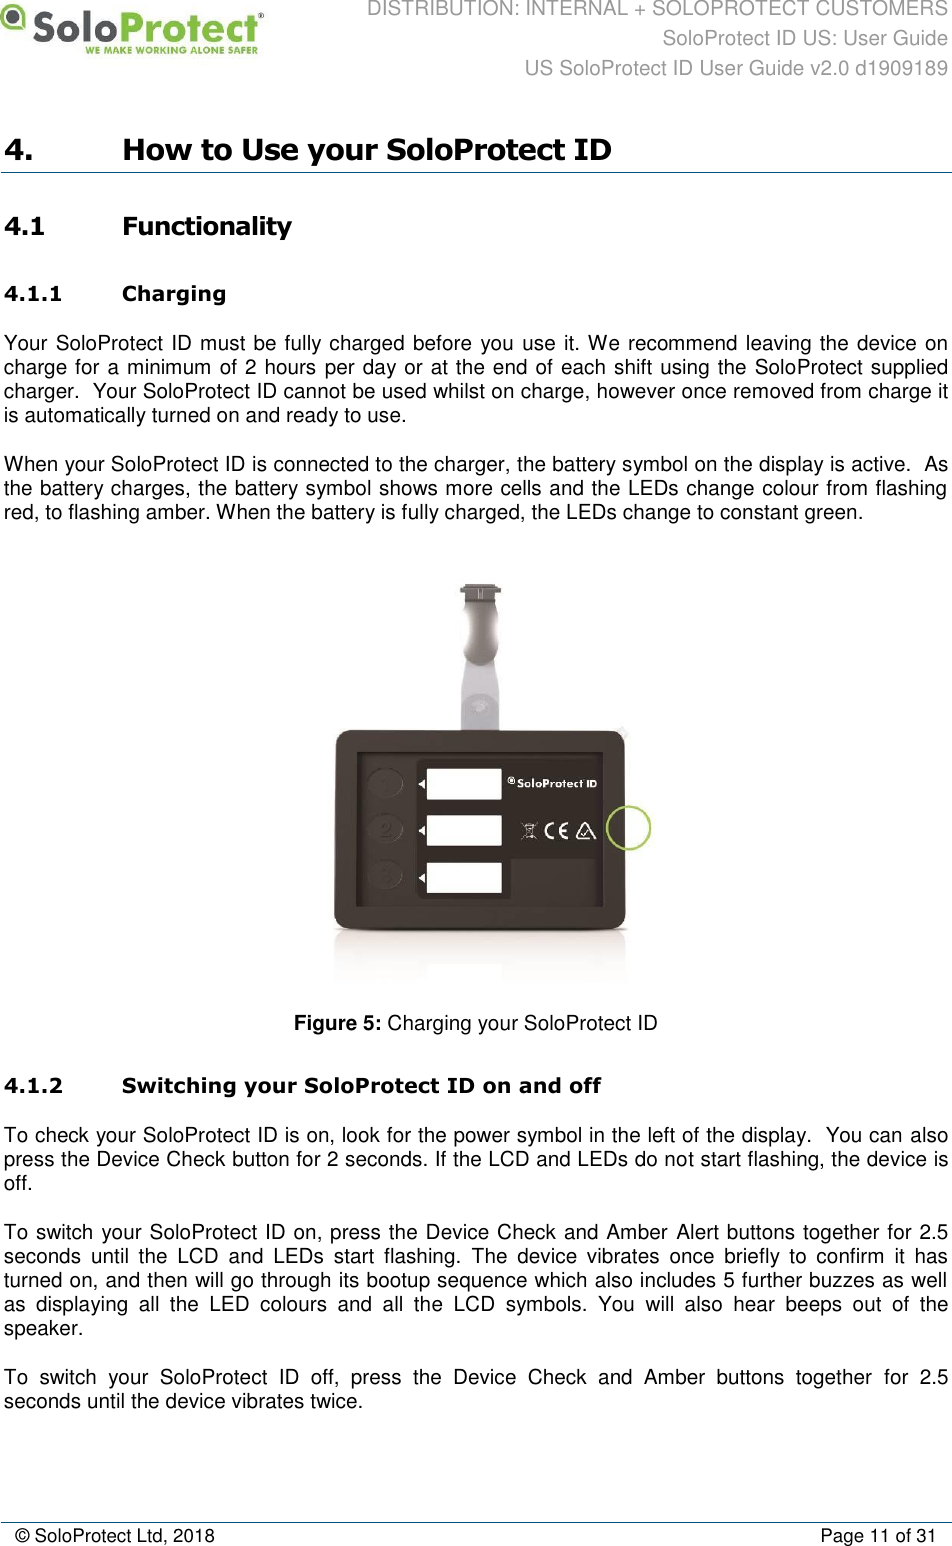 DISTRIBUTION: INTERNAL + SOLOPROTECT CUSTOMERS SoloProtect ID US: User Guide US SoloProtect ID User Guide v2.0 d1909189  © SoloProtect Ltd, 2018  Page 11 of 31 4. How to Use your SoloProtect ID 4.1 Functionality 4.1.1 Charging Your SoloProtect ID must be fully charged before you use it. We recommend leaving the device on charge for a minimum of 2 hours per day or at the end of each shift using the SoloProtect supplied charger.  Your SoloProtect ID cannot be used whilst on charge, however once removed from charge it is automatically turned on and ready to use. When your SoloProtect ID is connected to the charger, the battery symbol on the display is active.  As the battery charges, the battery symbol shows more cells and the LEDs change colour from flashing red, to flashing amber. When the battery is fully charged, the LEDs change to constant green.  Figure 5: Charging your SoloProtect ID  4.1.2 Switching your SoloProtect ID on and off To check your SoloProtect ID is on, look for the power symbol in the left of the display.  You can also press the Device Check button for 2 seconds. If the LCD and LEDs do not start flashing, the device is off. To switch your SoloProtect ID on, press the Device Check and Amber Alert buttons together for 2.5 seconds  until  the  LCD  and  LEDs  start  flashing.  The  device  vibrates  once  briefly  to  confirm  it  has turned on, and then will go through its bootup sequence which also includes 5 further buzzes as well as  displaying  all  the  LED  colours  and  all  the  LCD  symbols.  You  will  also  hear  beeps  out  of  the speaker. To  switch  your  SoloProtect  ID  off,  press  the  Device  Check  and  Amber  buttons  together  for  2.5 seconds until the device vibrates twice. 